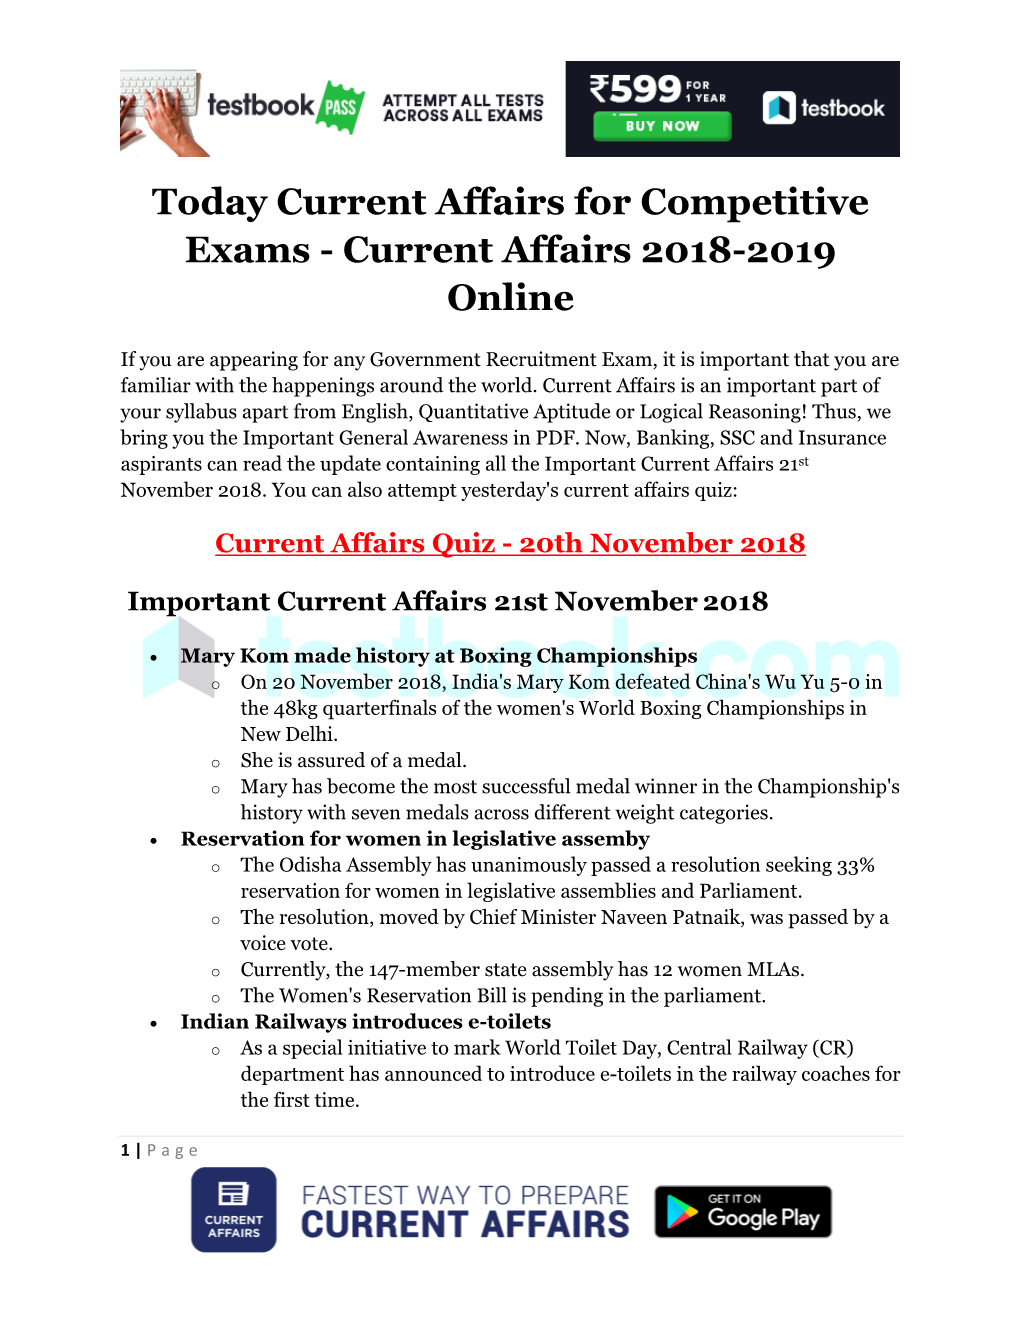 Today Current Affairs for Competitive Exams - Current Affairs 2018-2019 Online